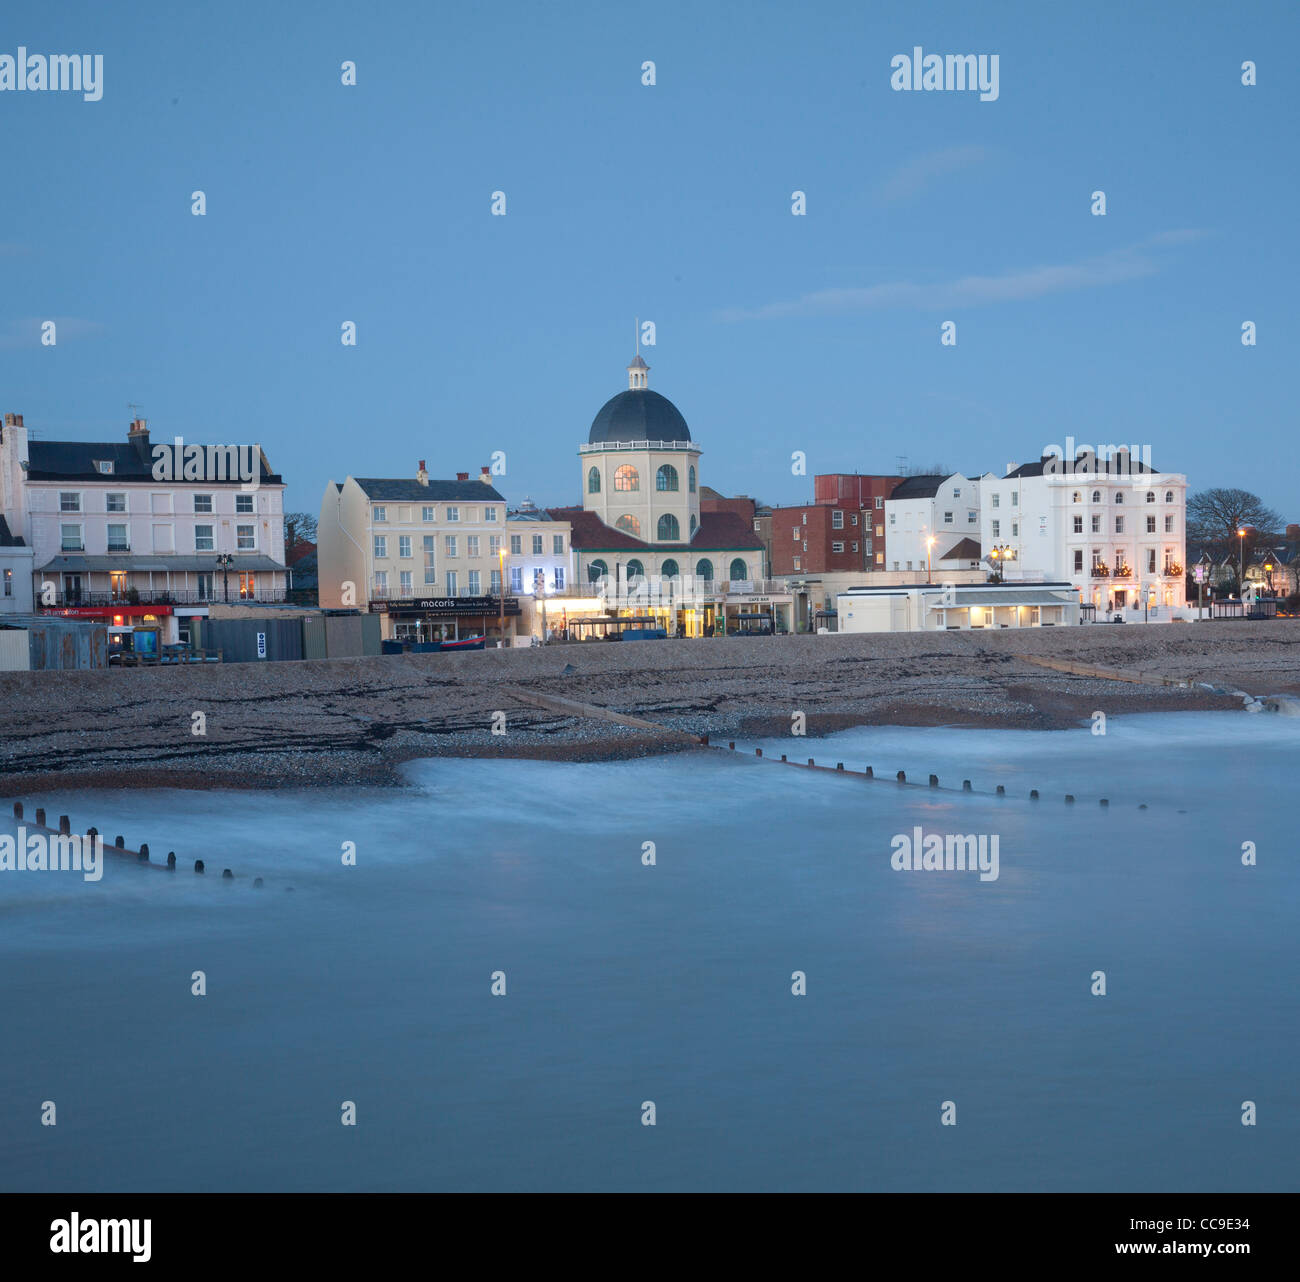 Evening view of Worthing seafront, West Sussex, as seen from pier Stock Photo